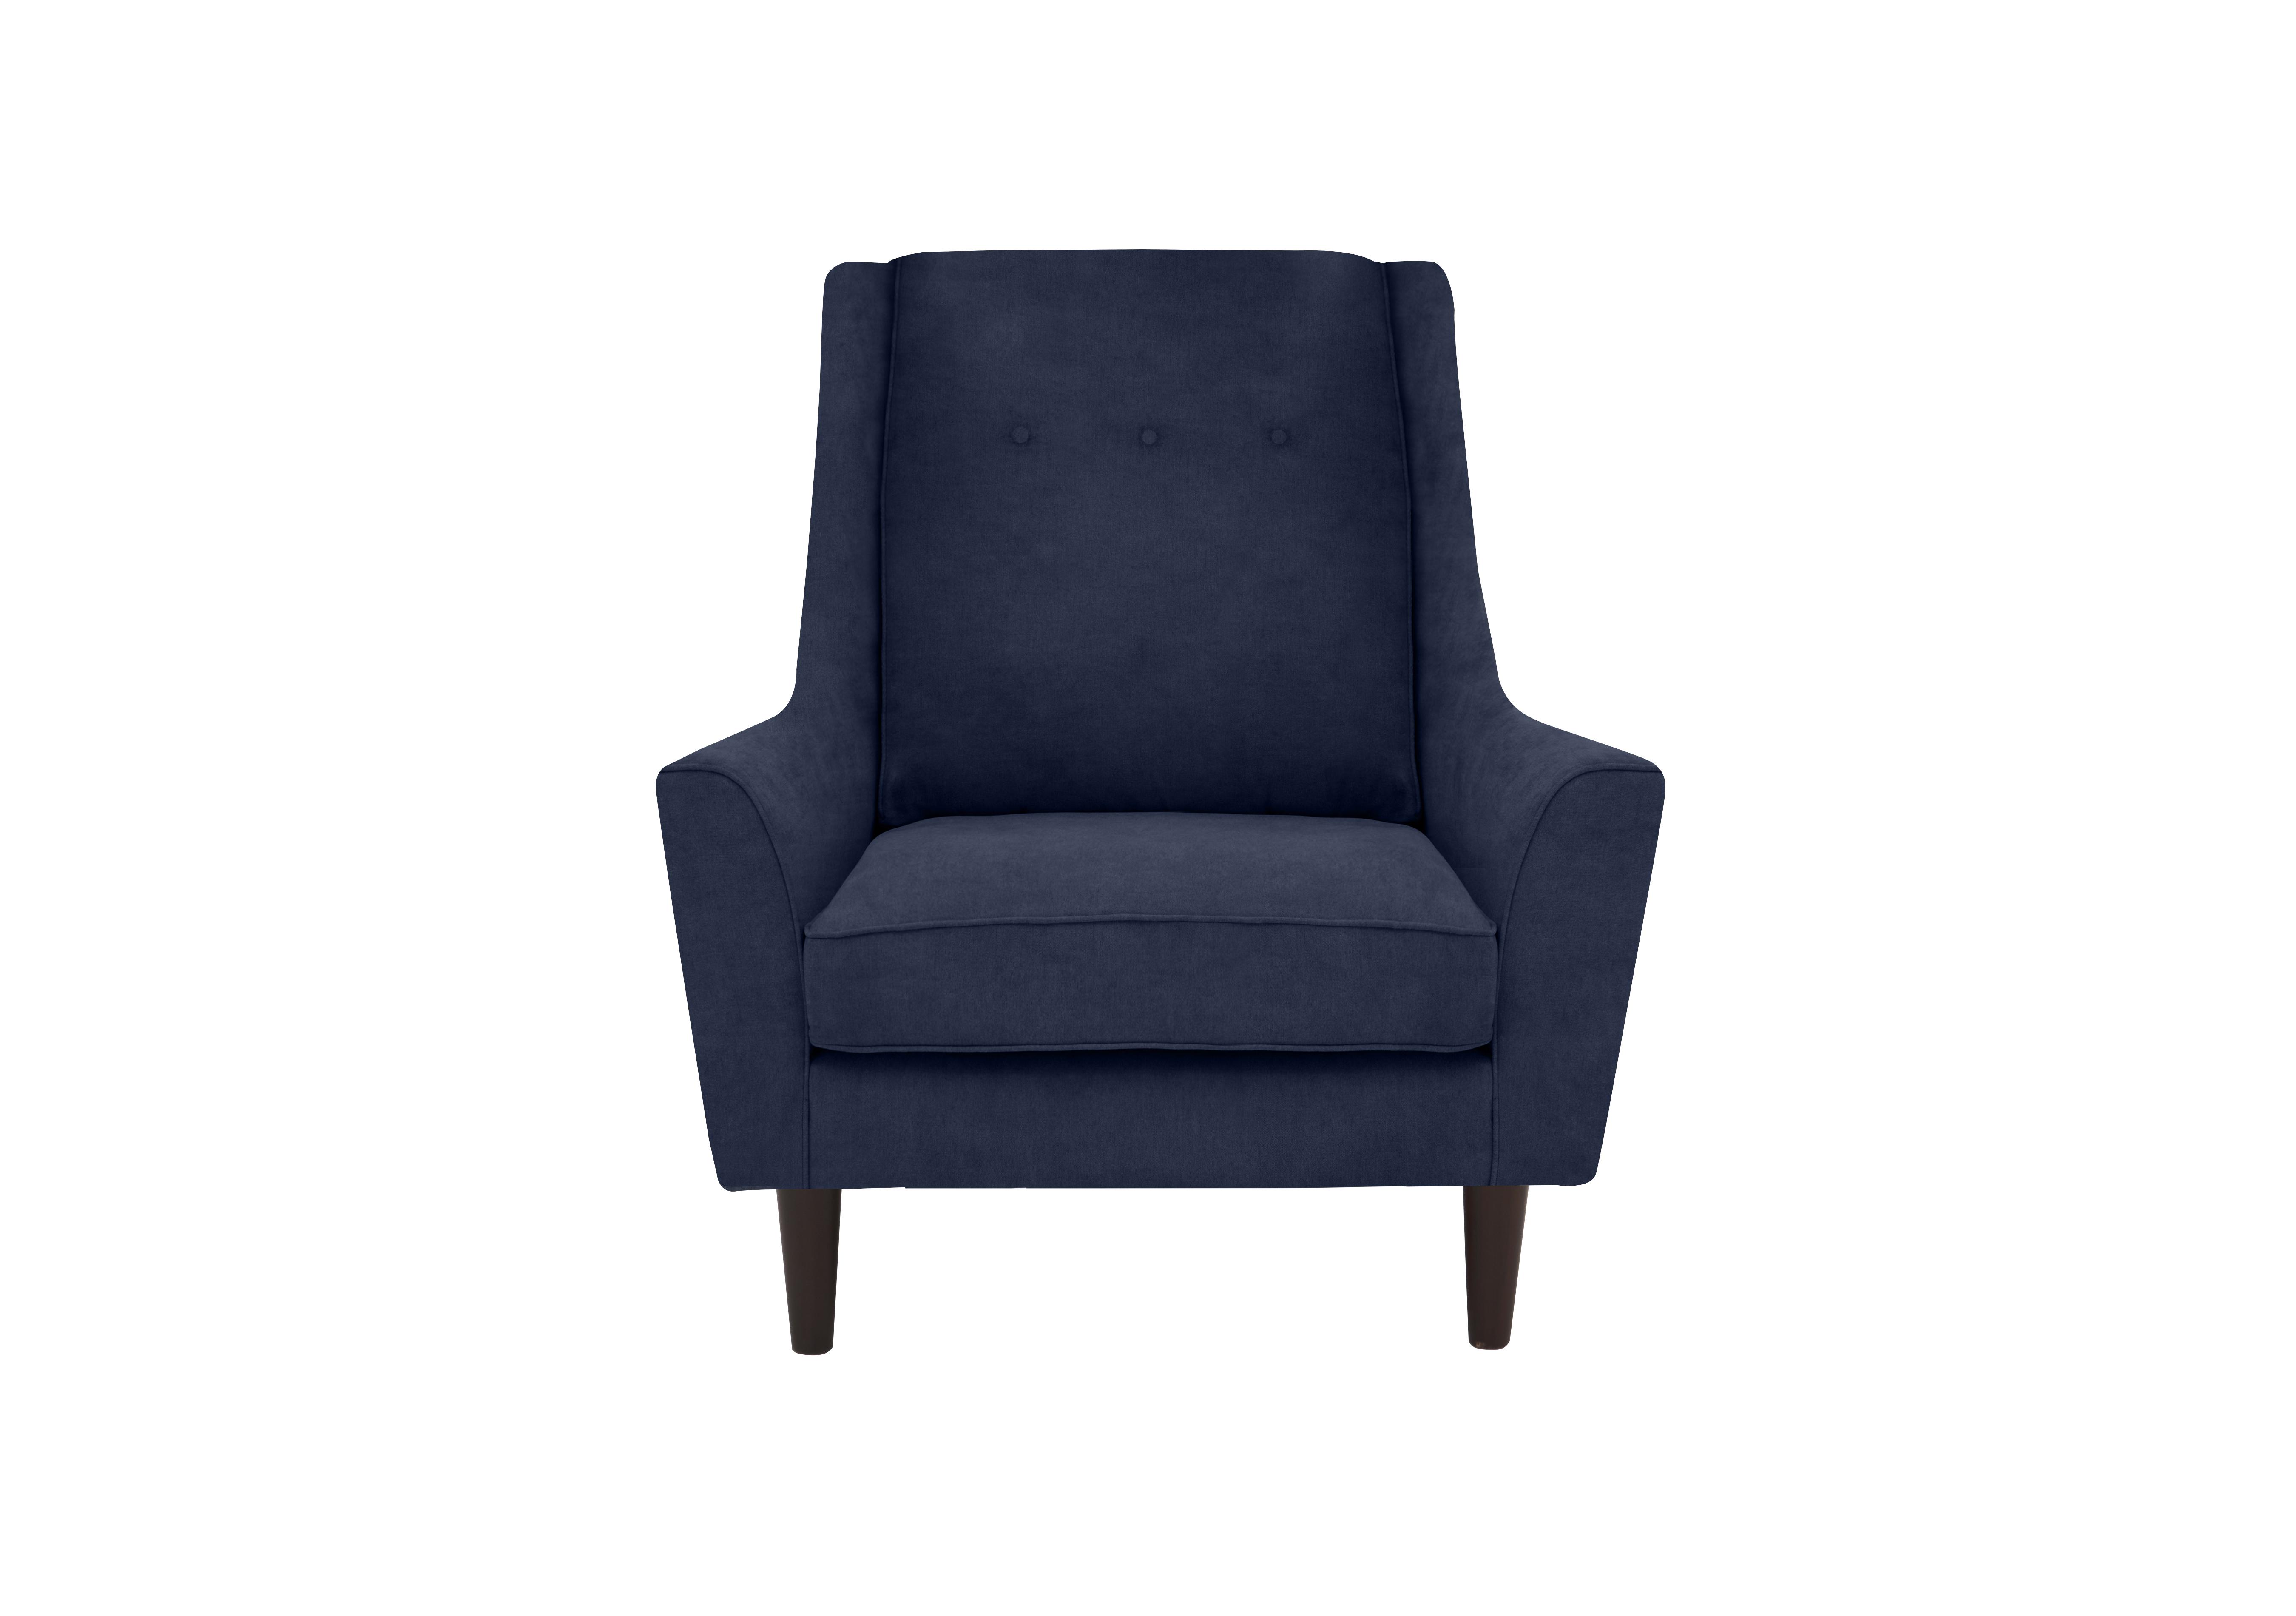 Legend Fabric Designer Accent Chair in Cosmo Navy on Furniture Village